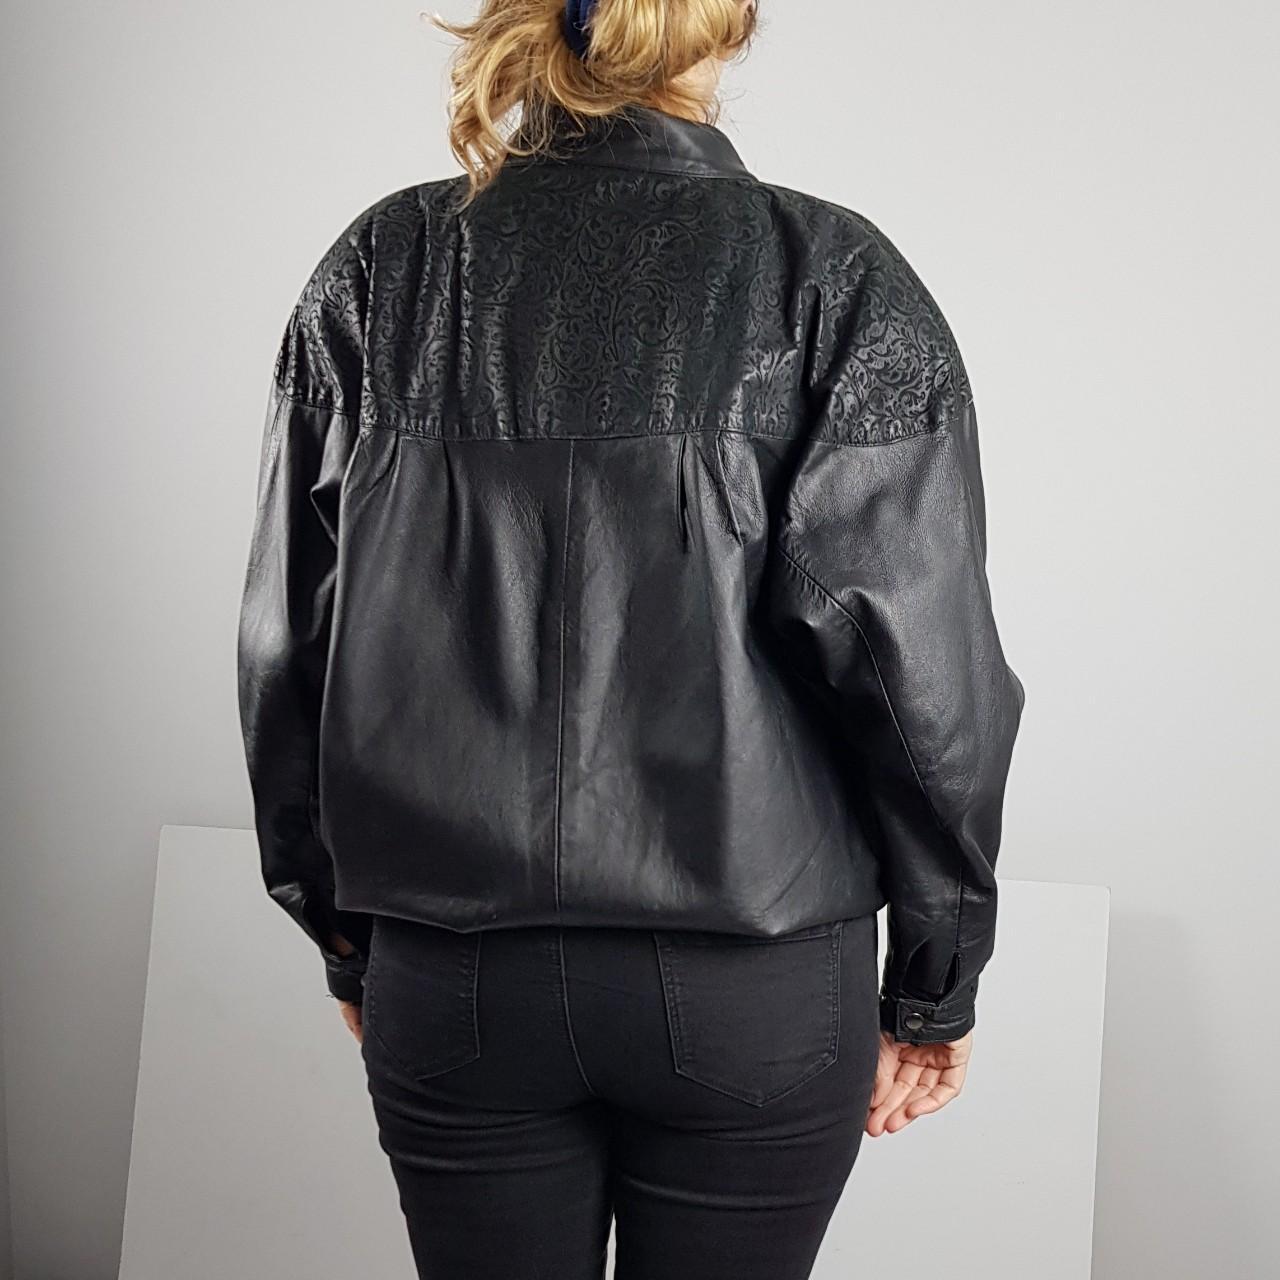 Vintage leather bomber jacket, Late 80s / early